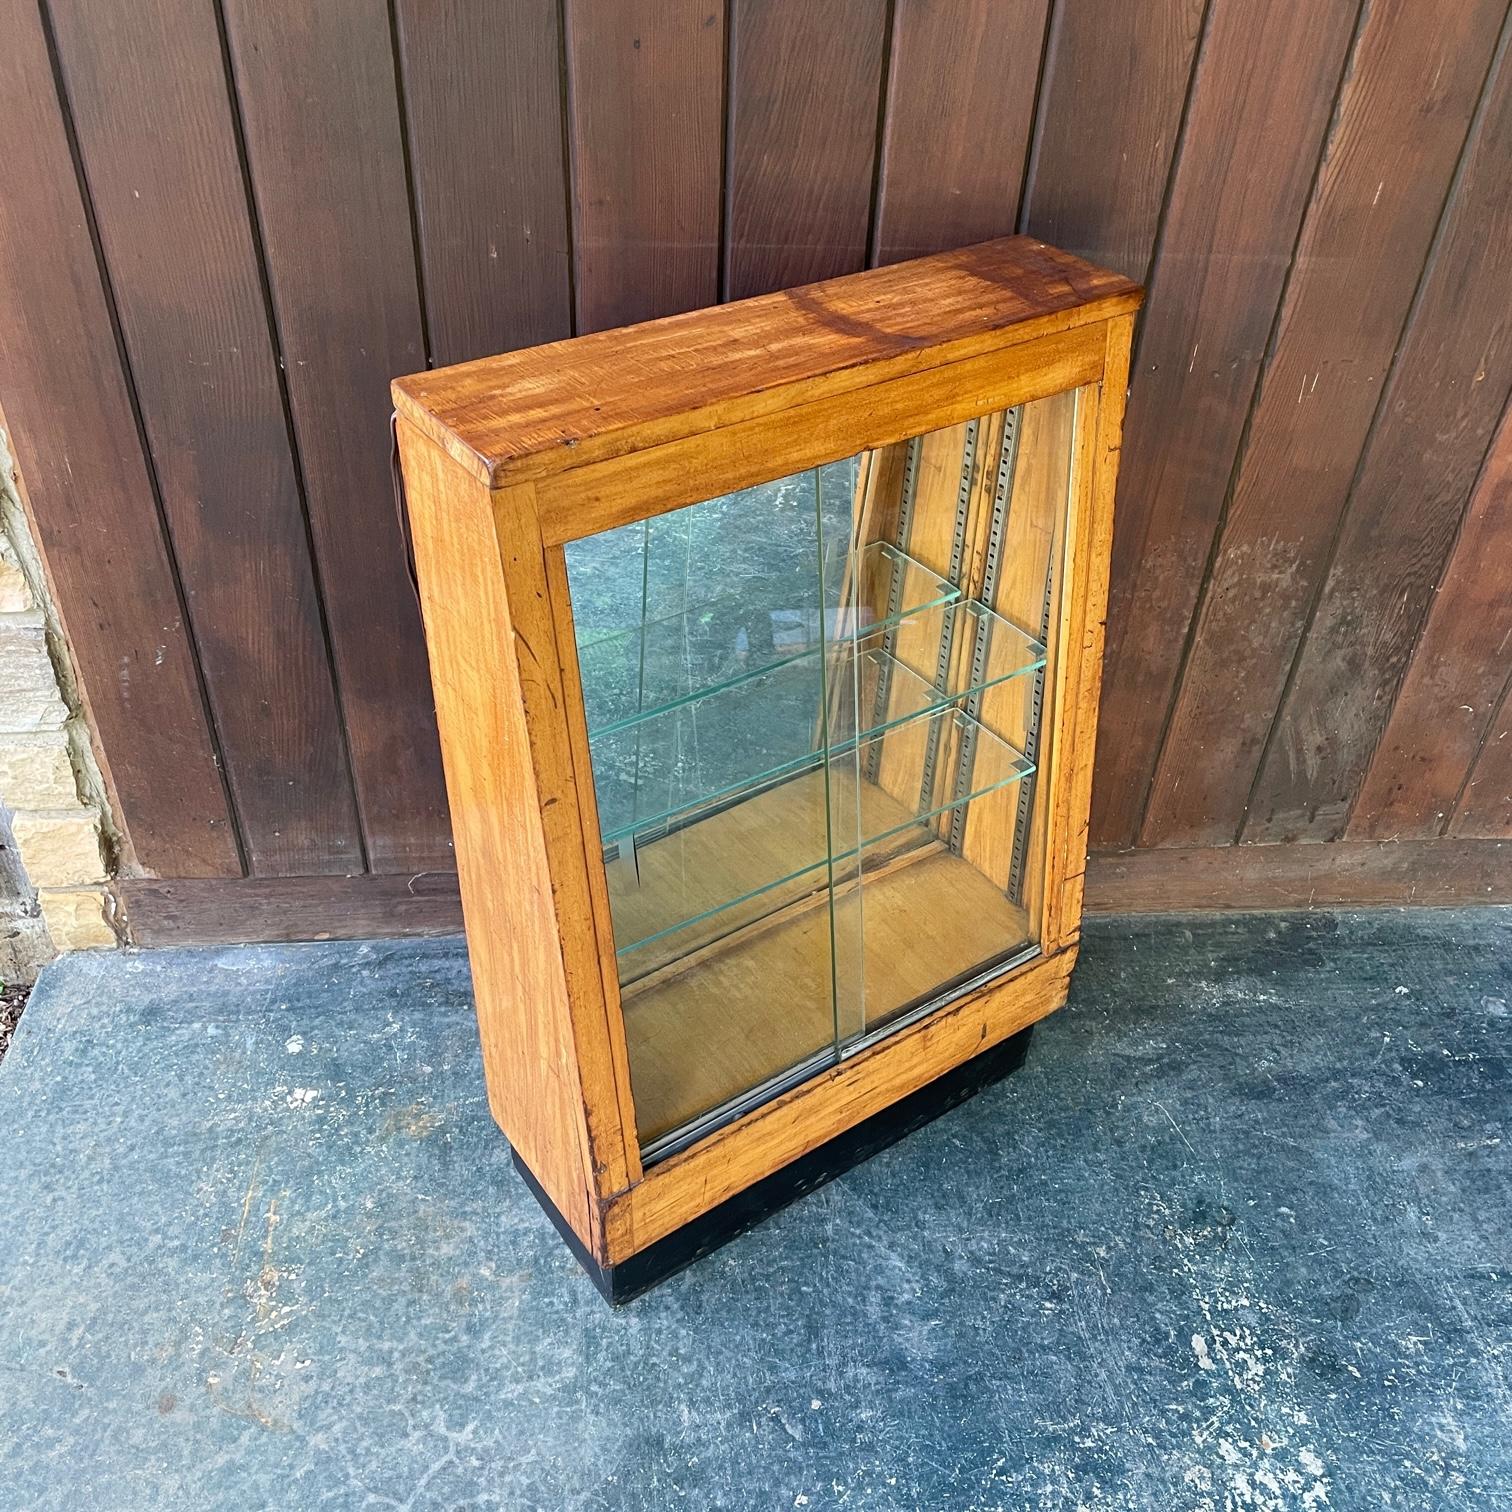 used display cases for sale near me